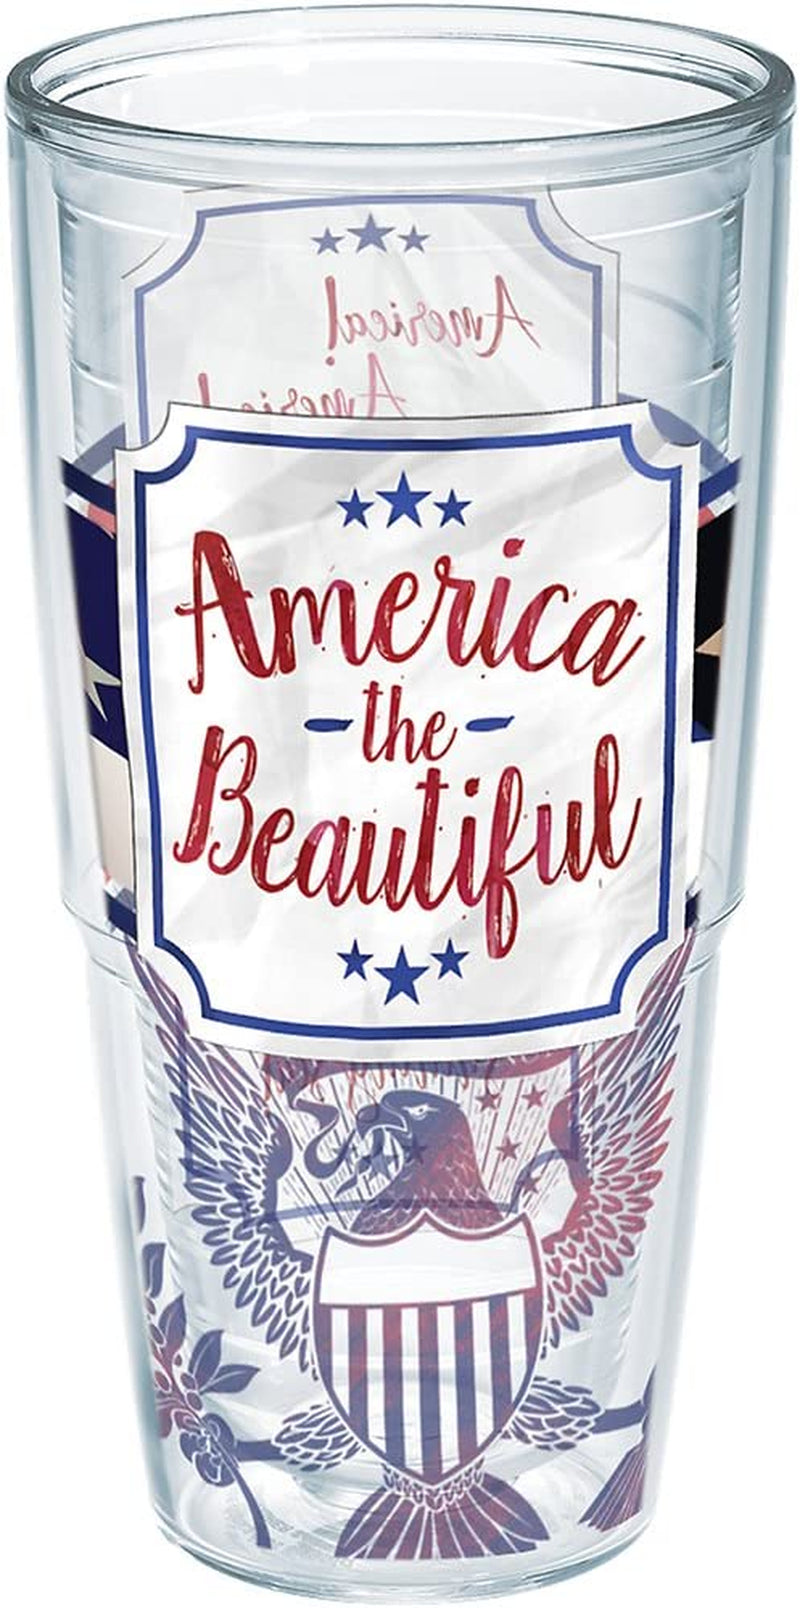 Tervis America the Beautiful Insulated Tumbler with Wrap, 16 Oz Mug - Tritan, Clear Home & Garden > Kitchen & Dining > Tableware > Drinkware Tervis Unlidded 24oz 